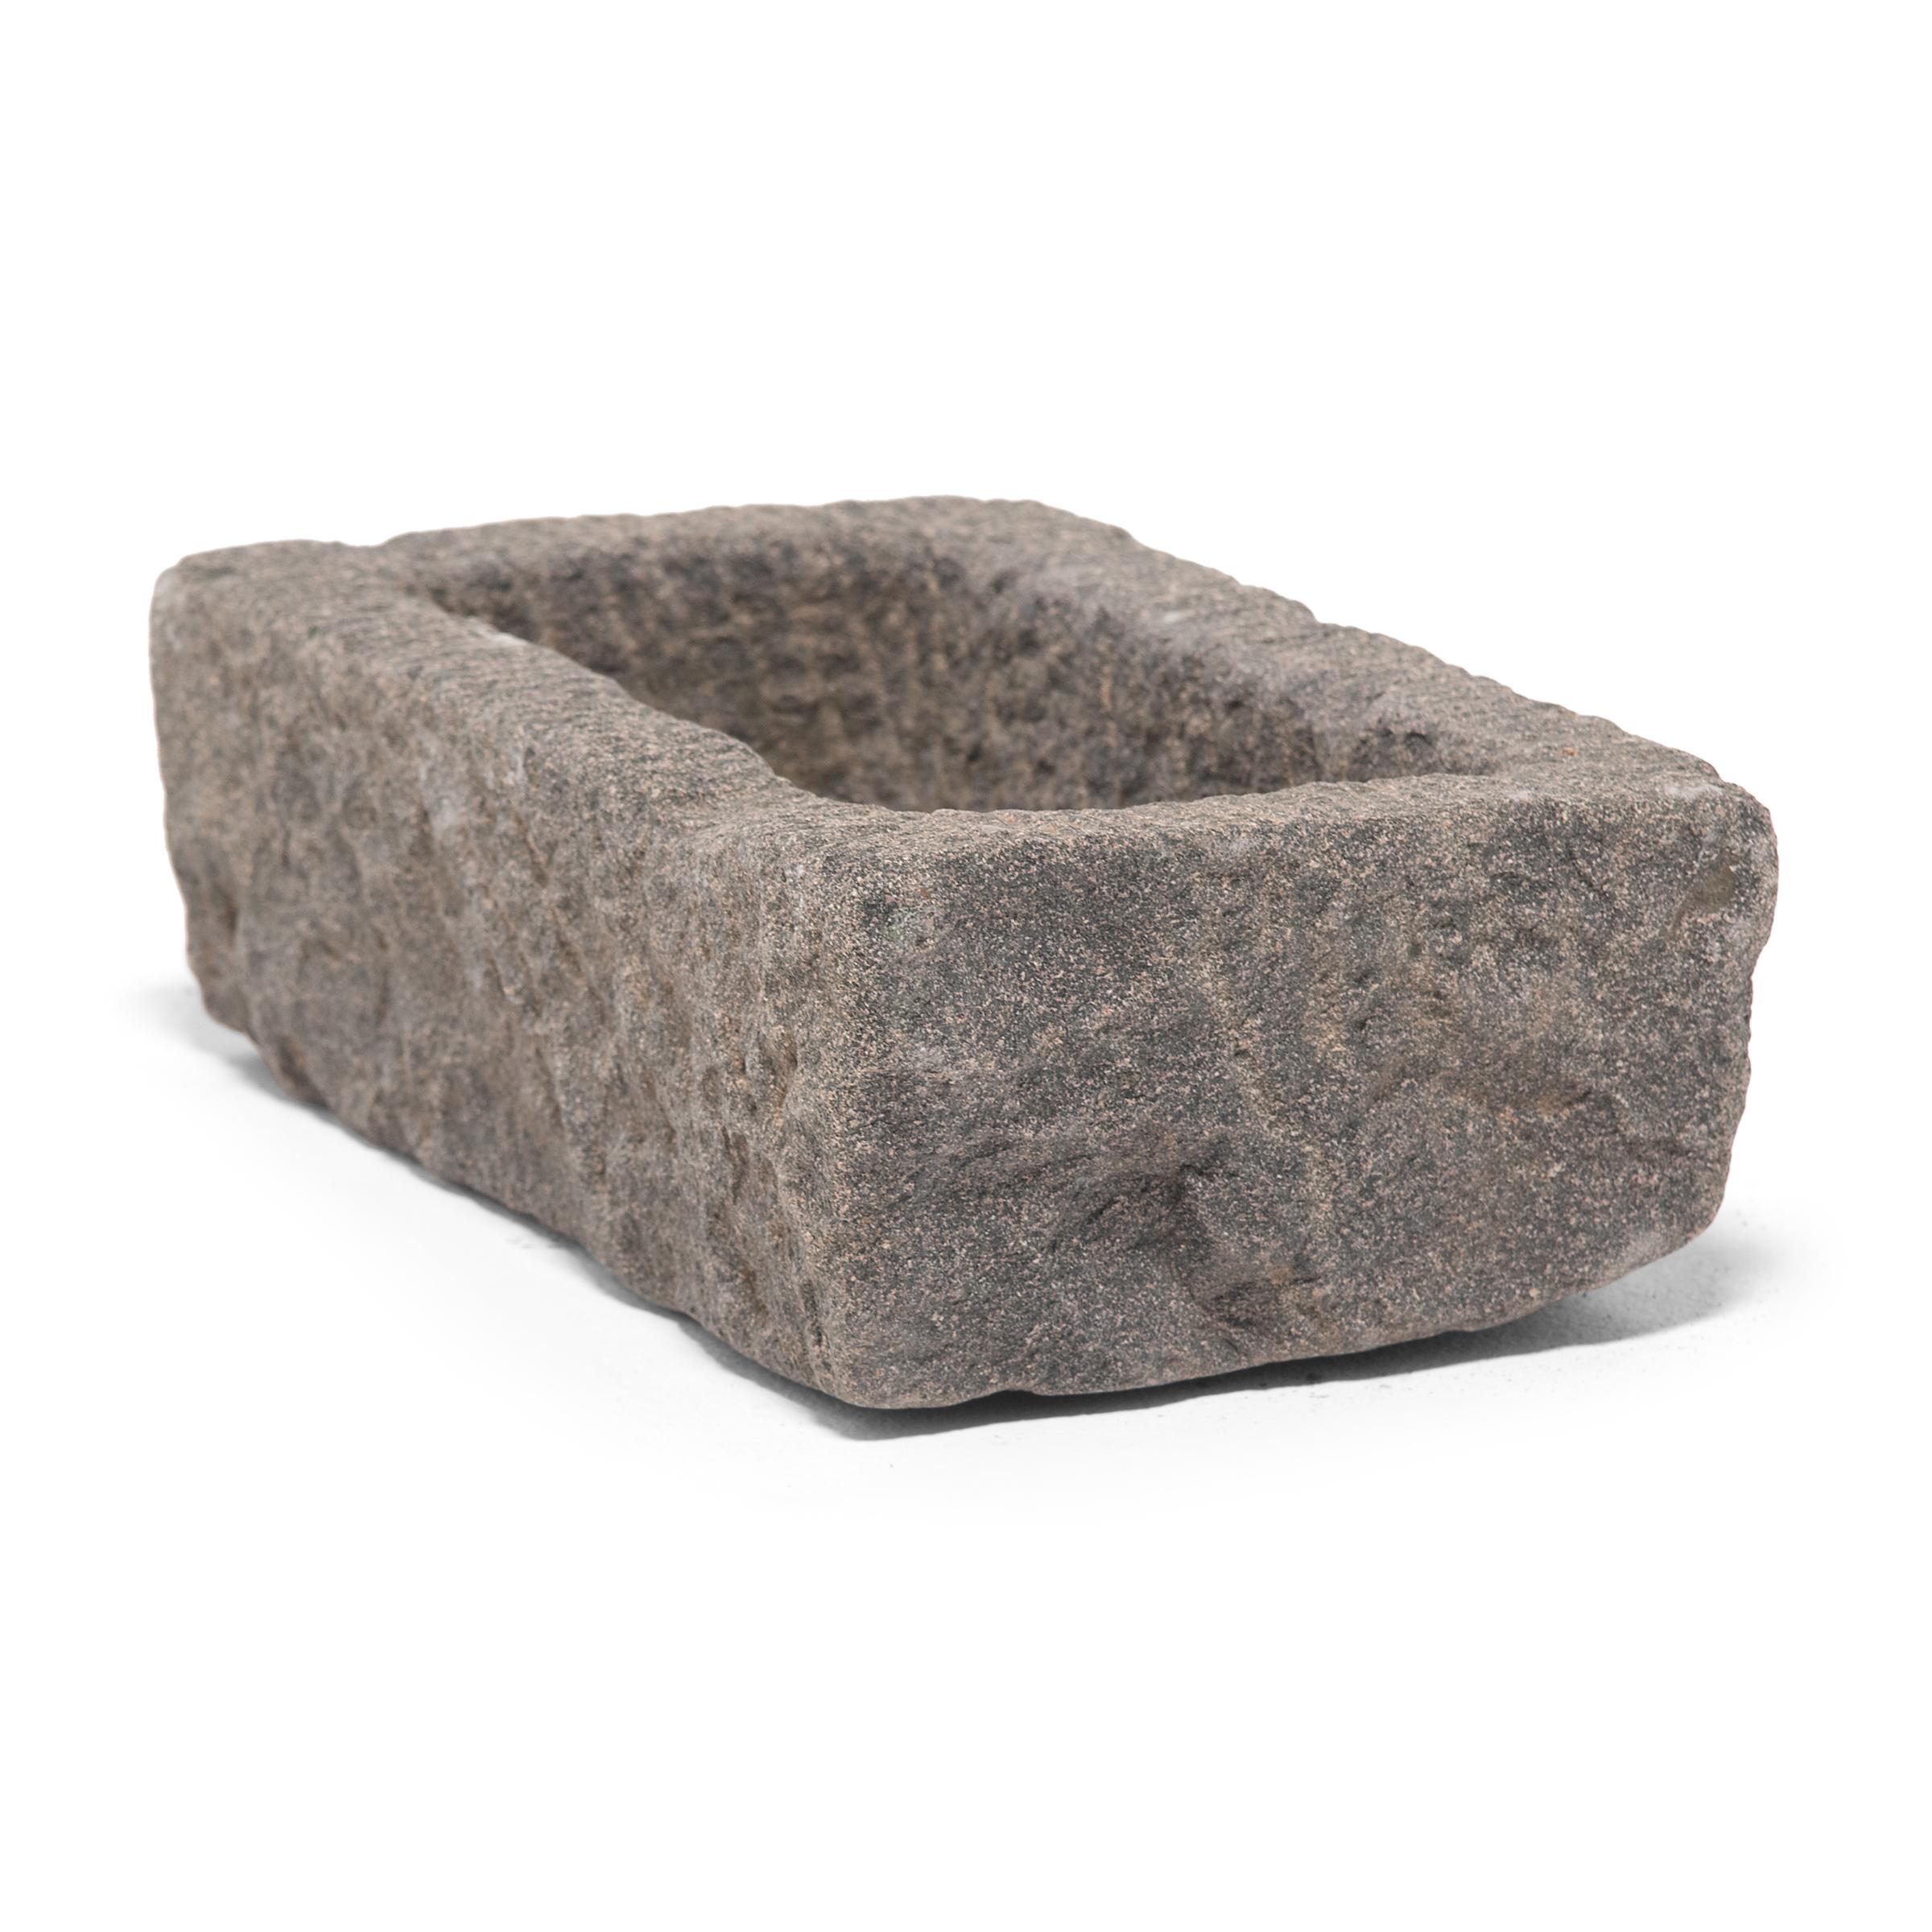 Once a common sight in courtyards throughout rural China, this textured stone vessel was used as a grain trough for chickens and other barnyard fowl. Chiseled from a block of granite over a century ago, the sculptural trough charms with its uneven